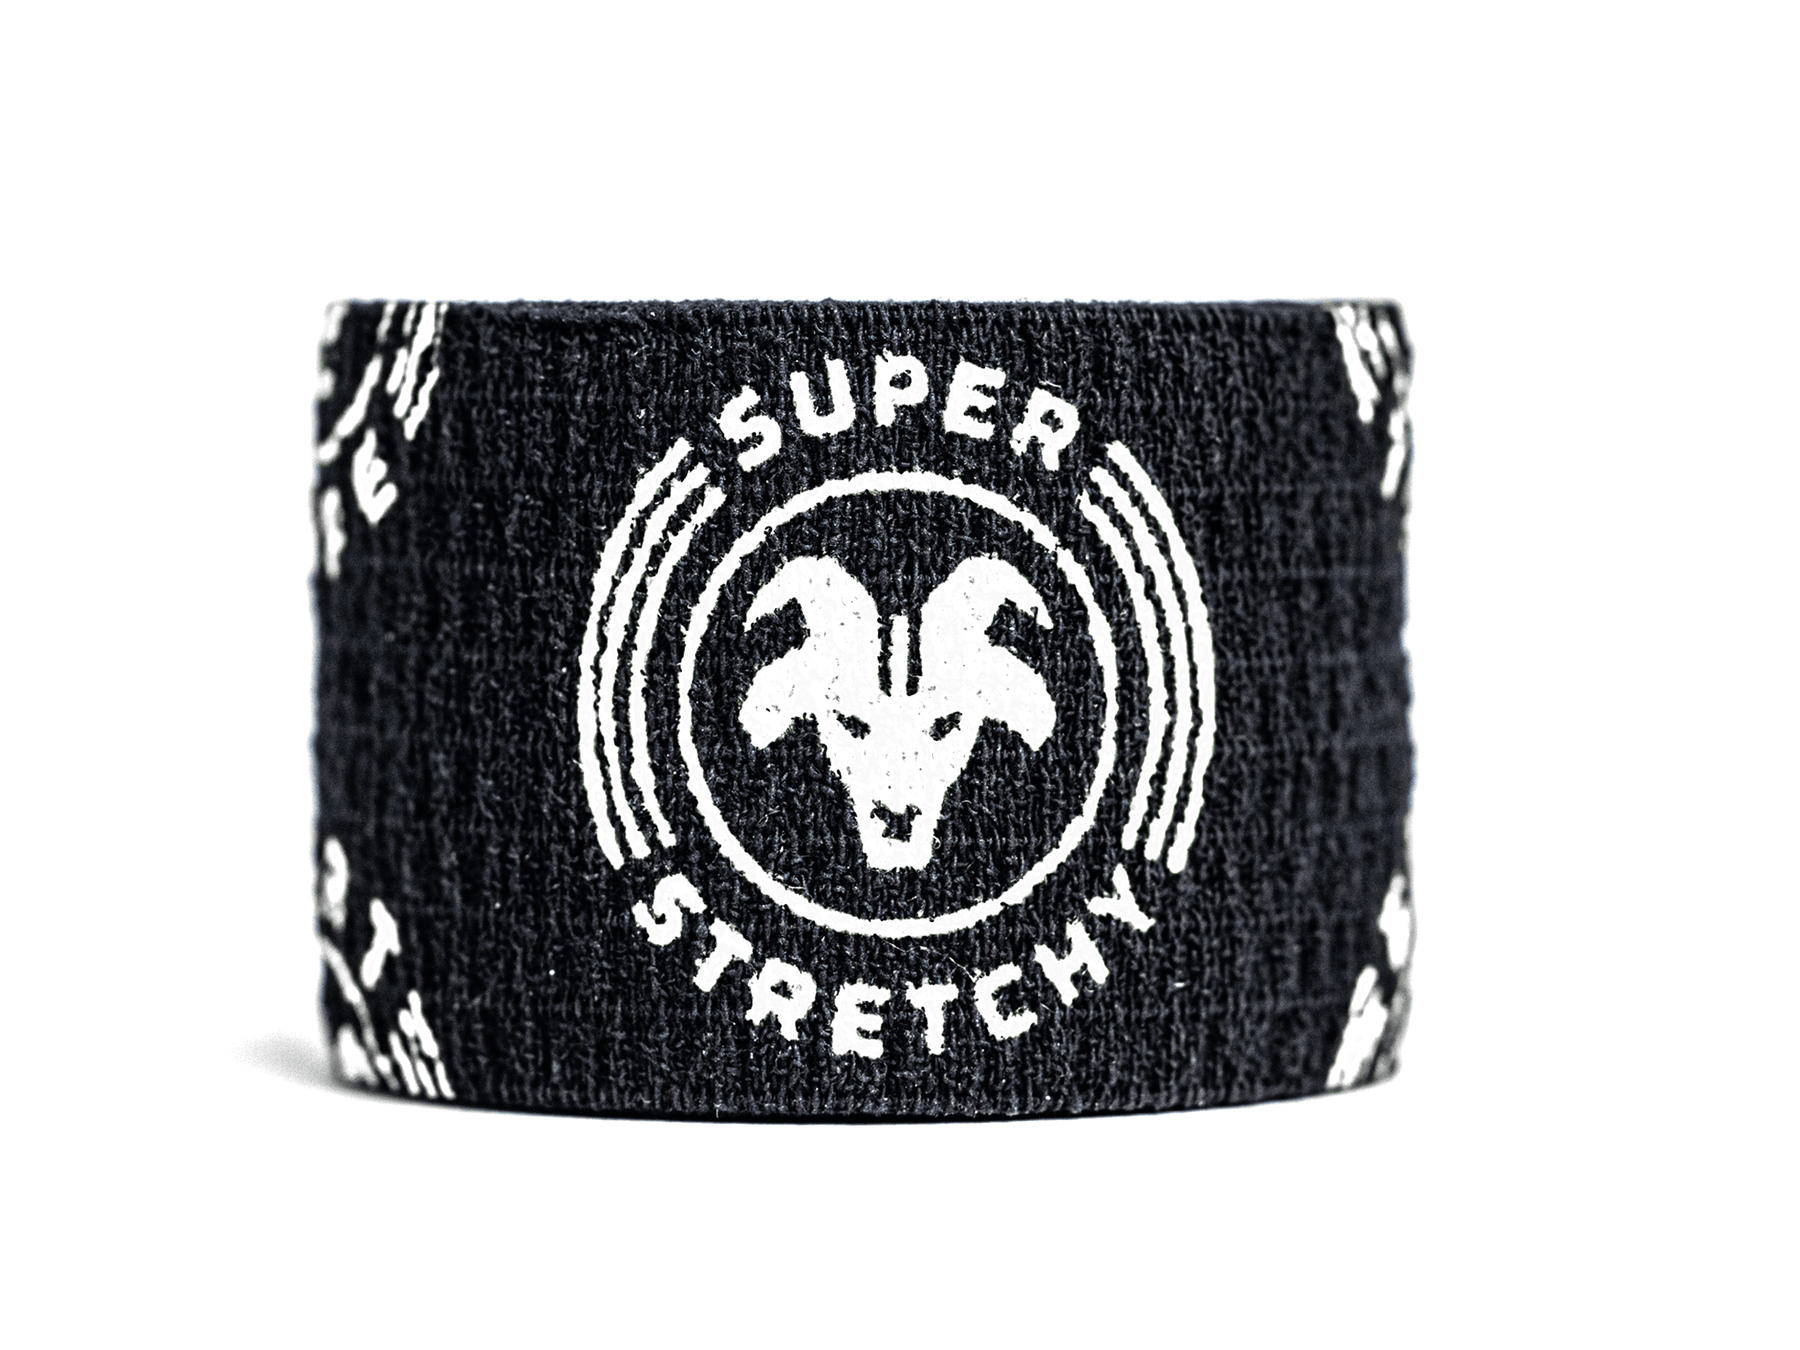 Goat Tape - Discover the different benefits and ways to use our tape  #Fitness #Weightlifting #Crossfit